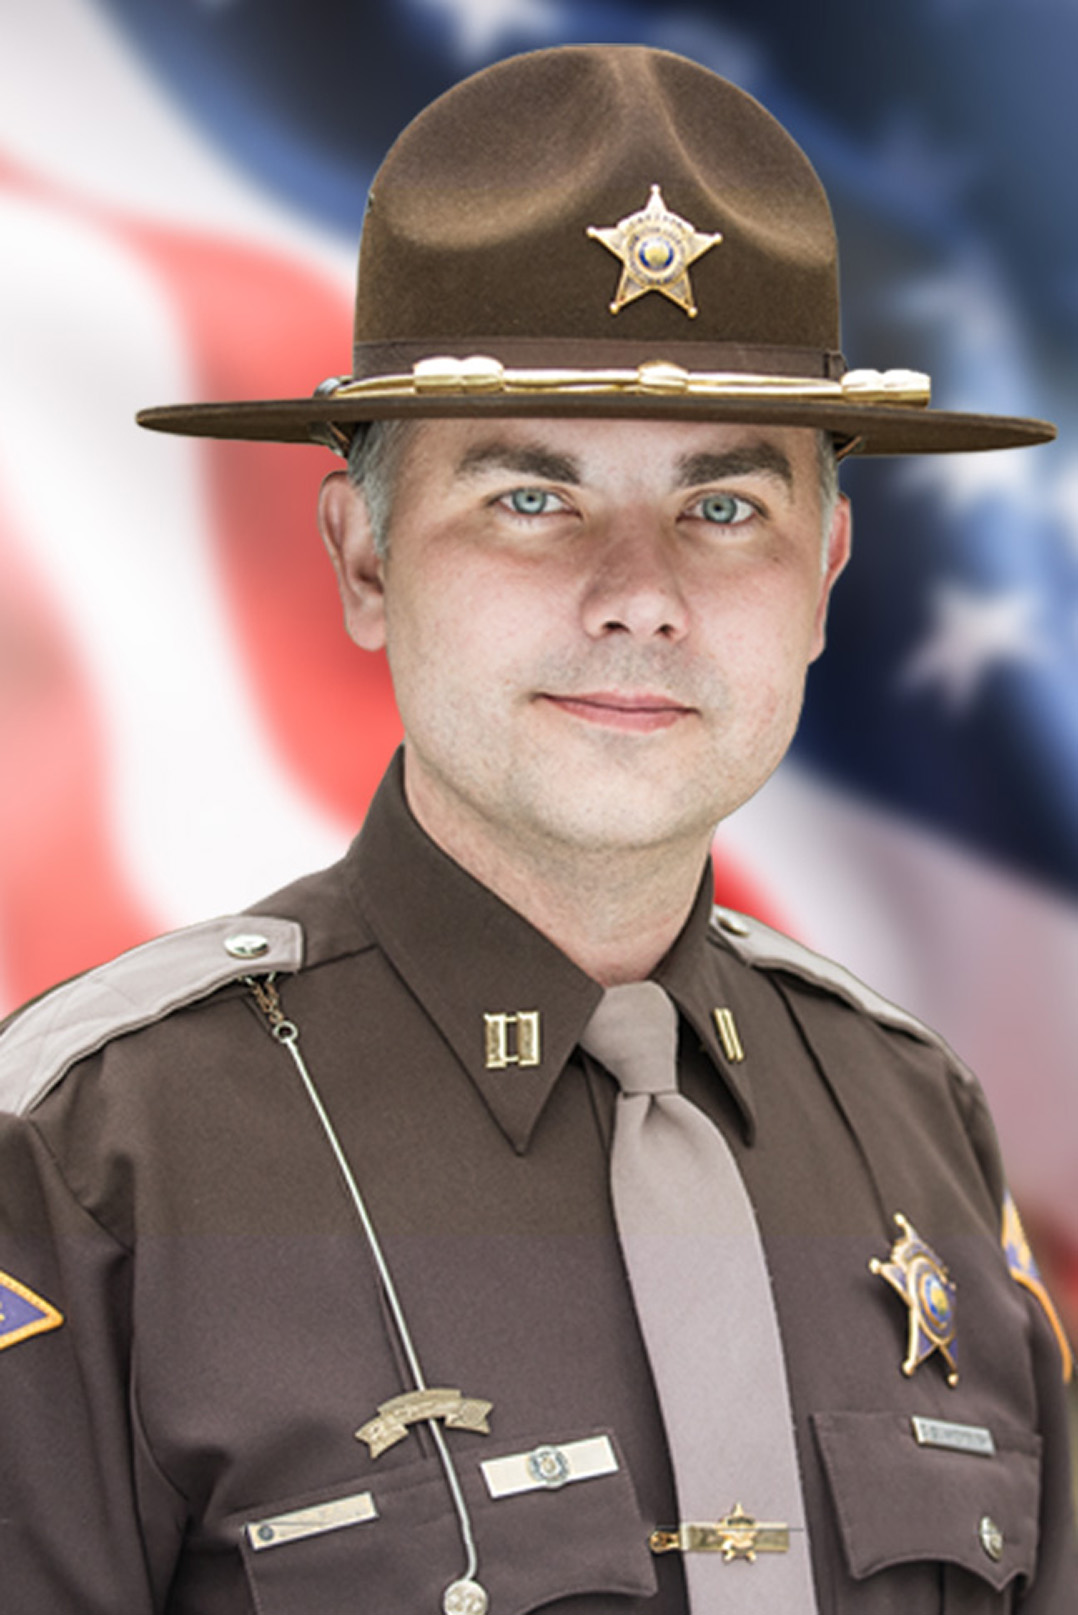 Meet the 4 candidates for Hamilton County sheriff